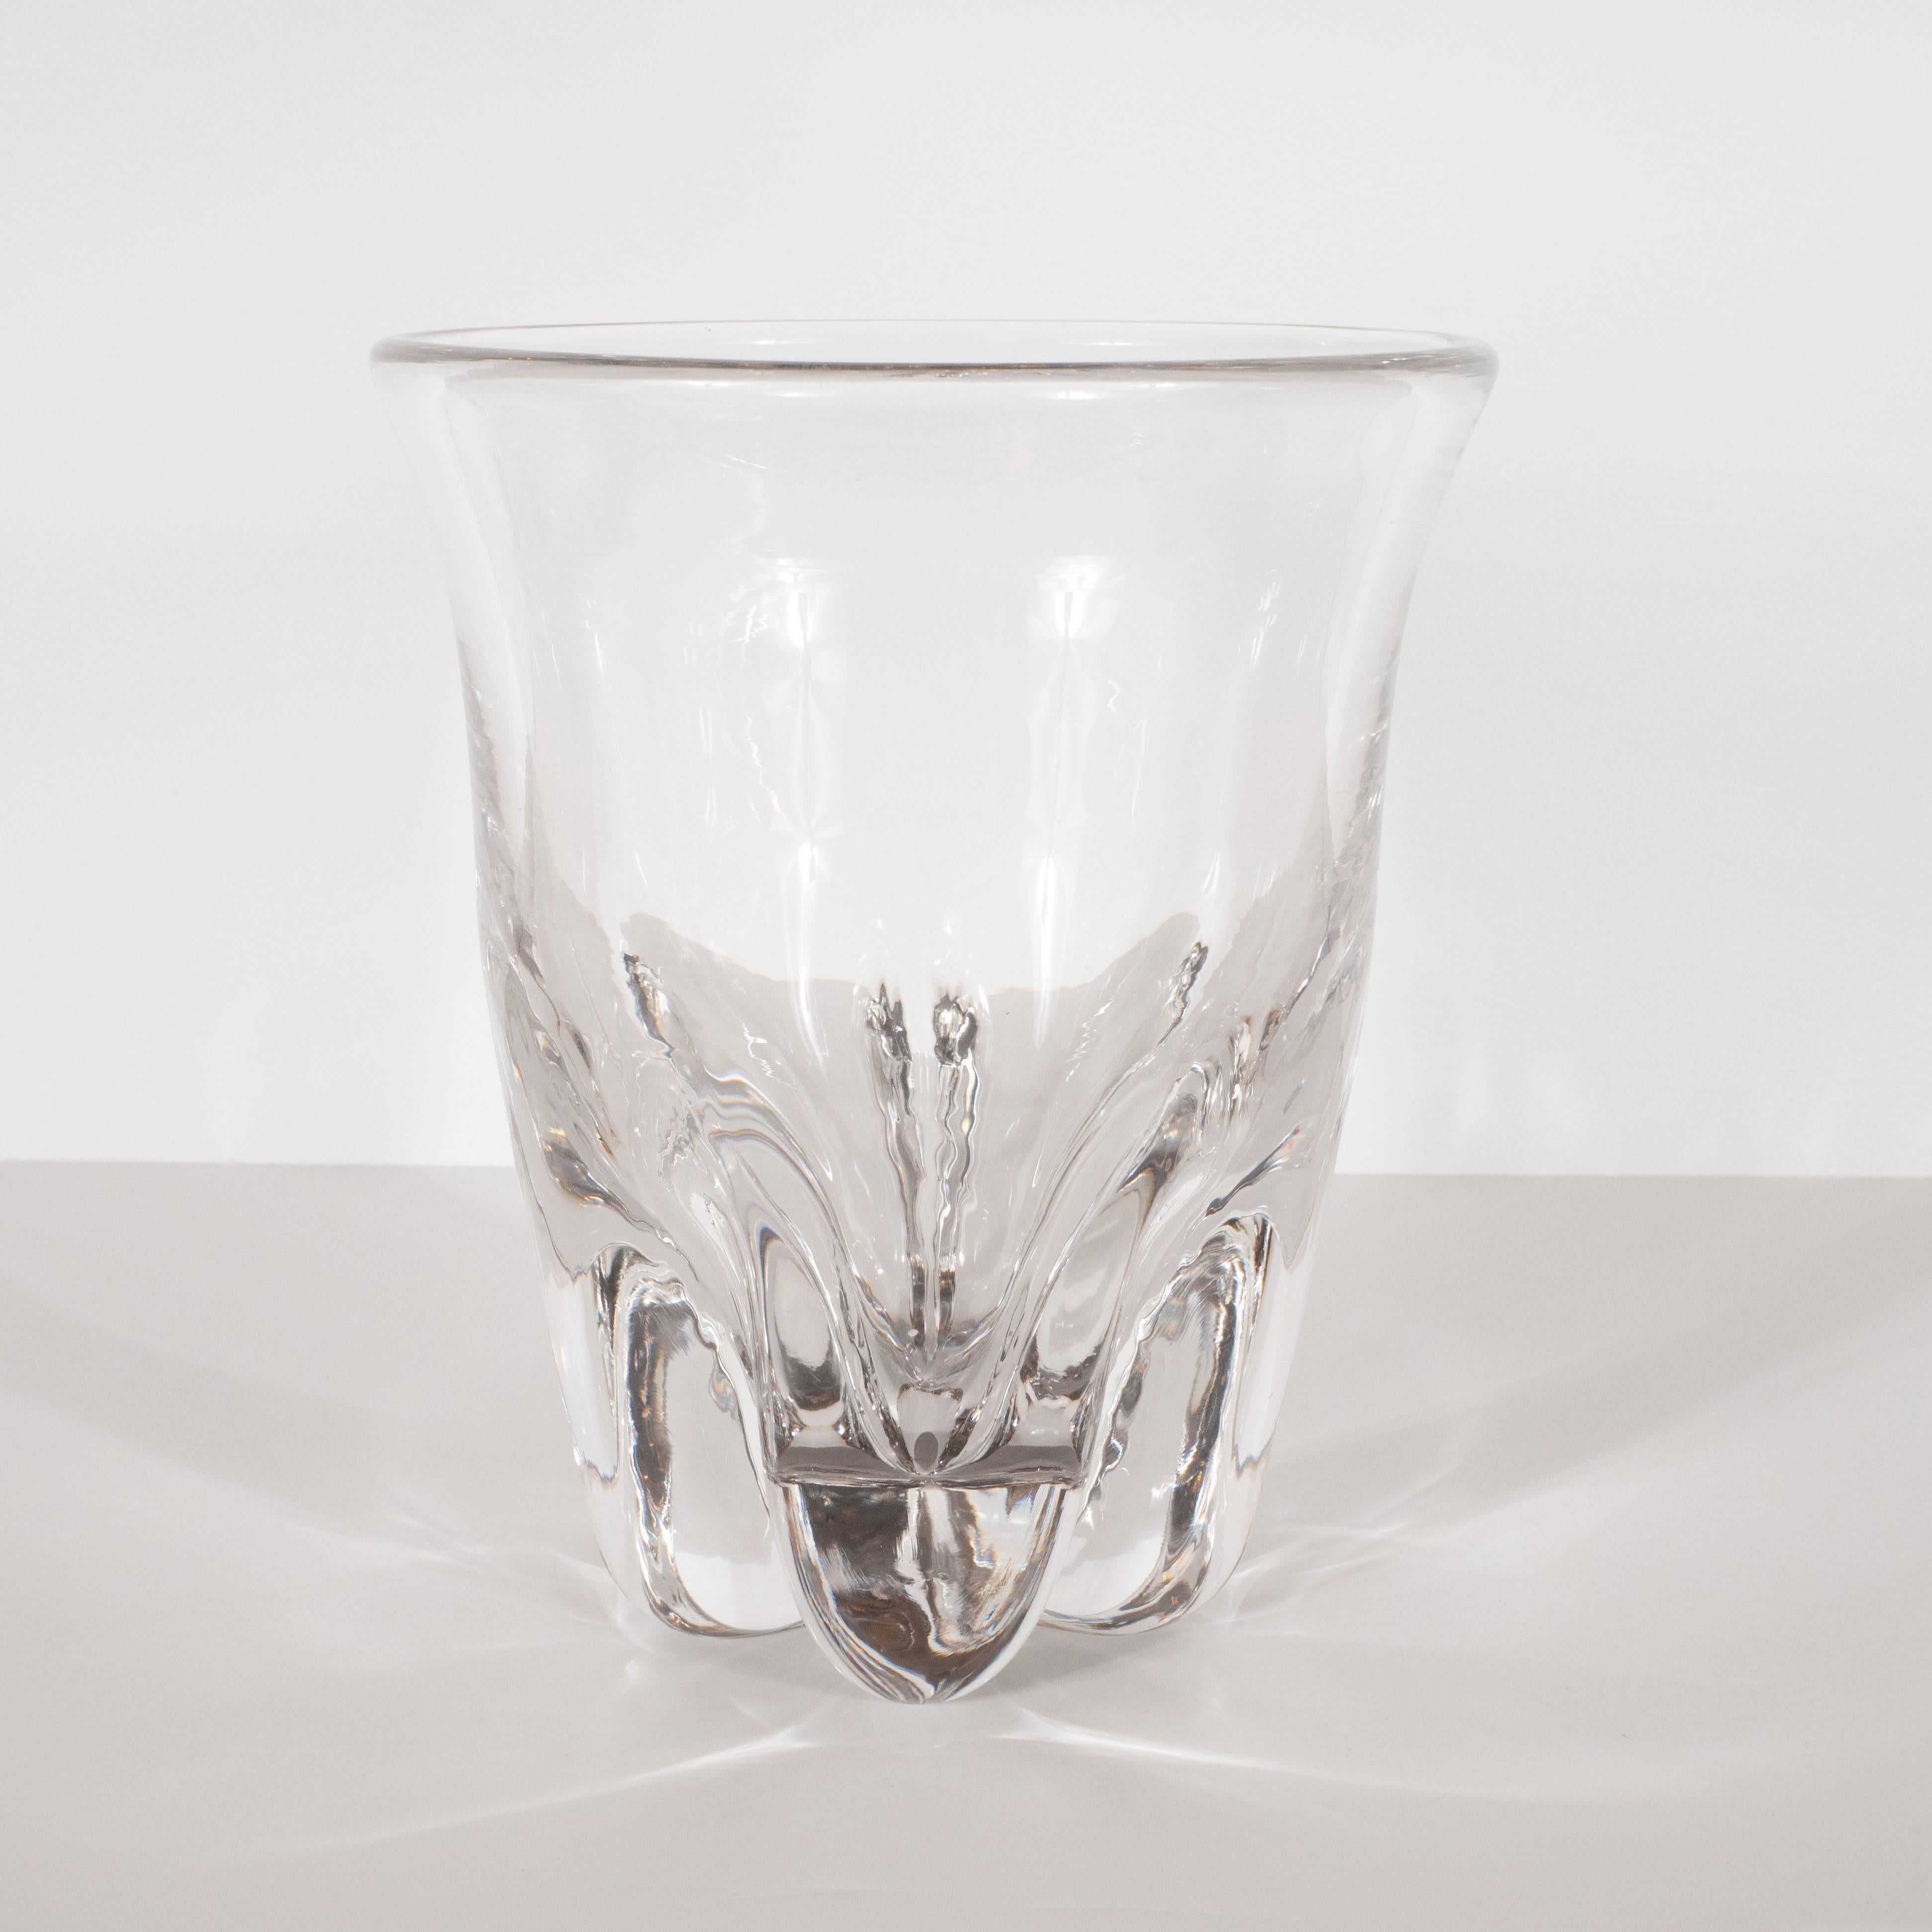 This sculptural and dramatic Mid-Century Modern glass vase was realized in Sweden, circa 1960. It features five robust curvilinear tear drop feet with deeply recessed channels separating them. The cylindrical body flares subtly at the mouth. This